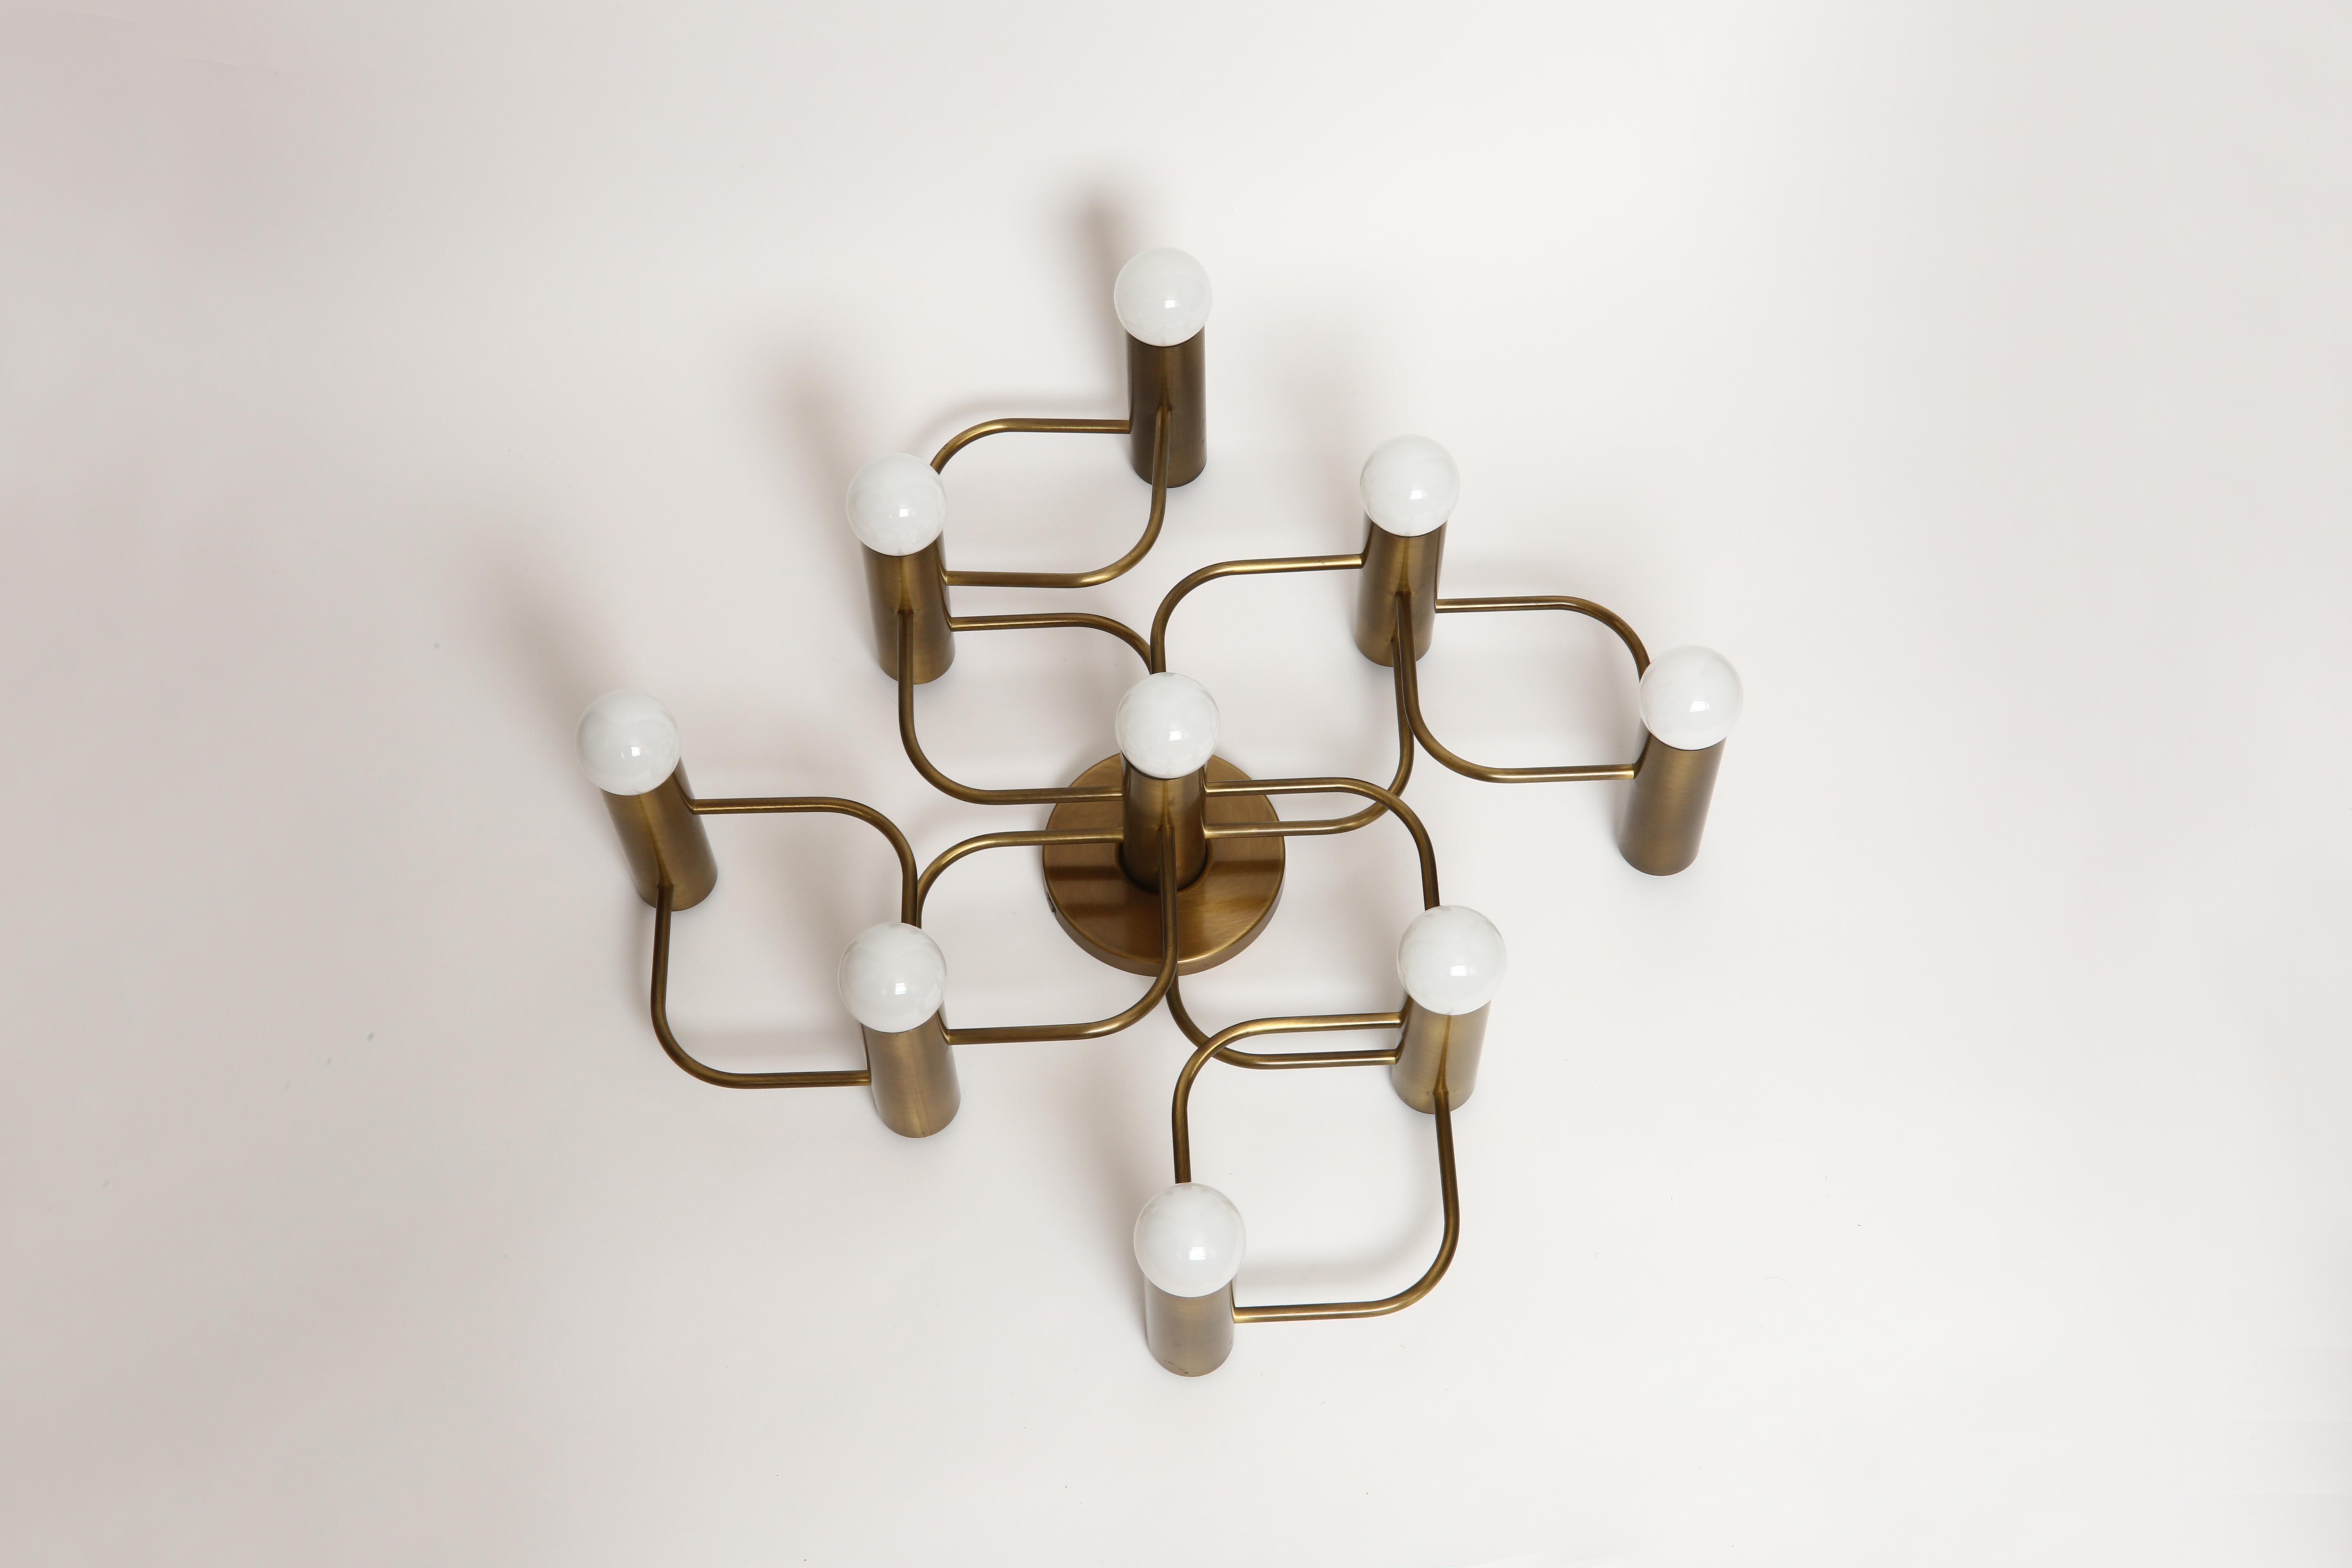 Sciolari style flushmount by Leola in patinated brass.
Nine medium base sockets. Can be used as either ceiling or wall light,
Germany, 1970s.
Also available in polished brass finish.